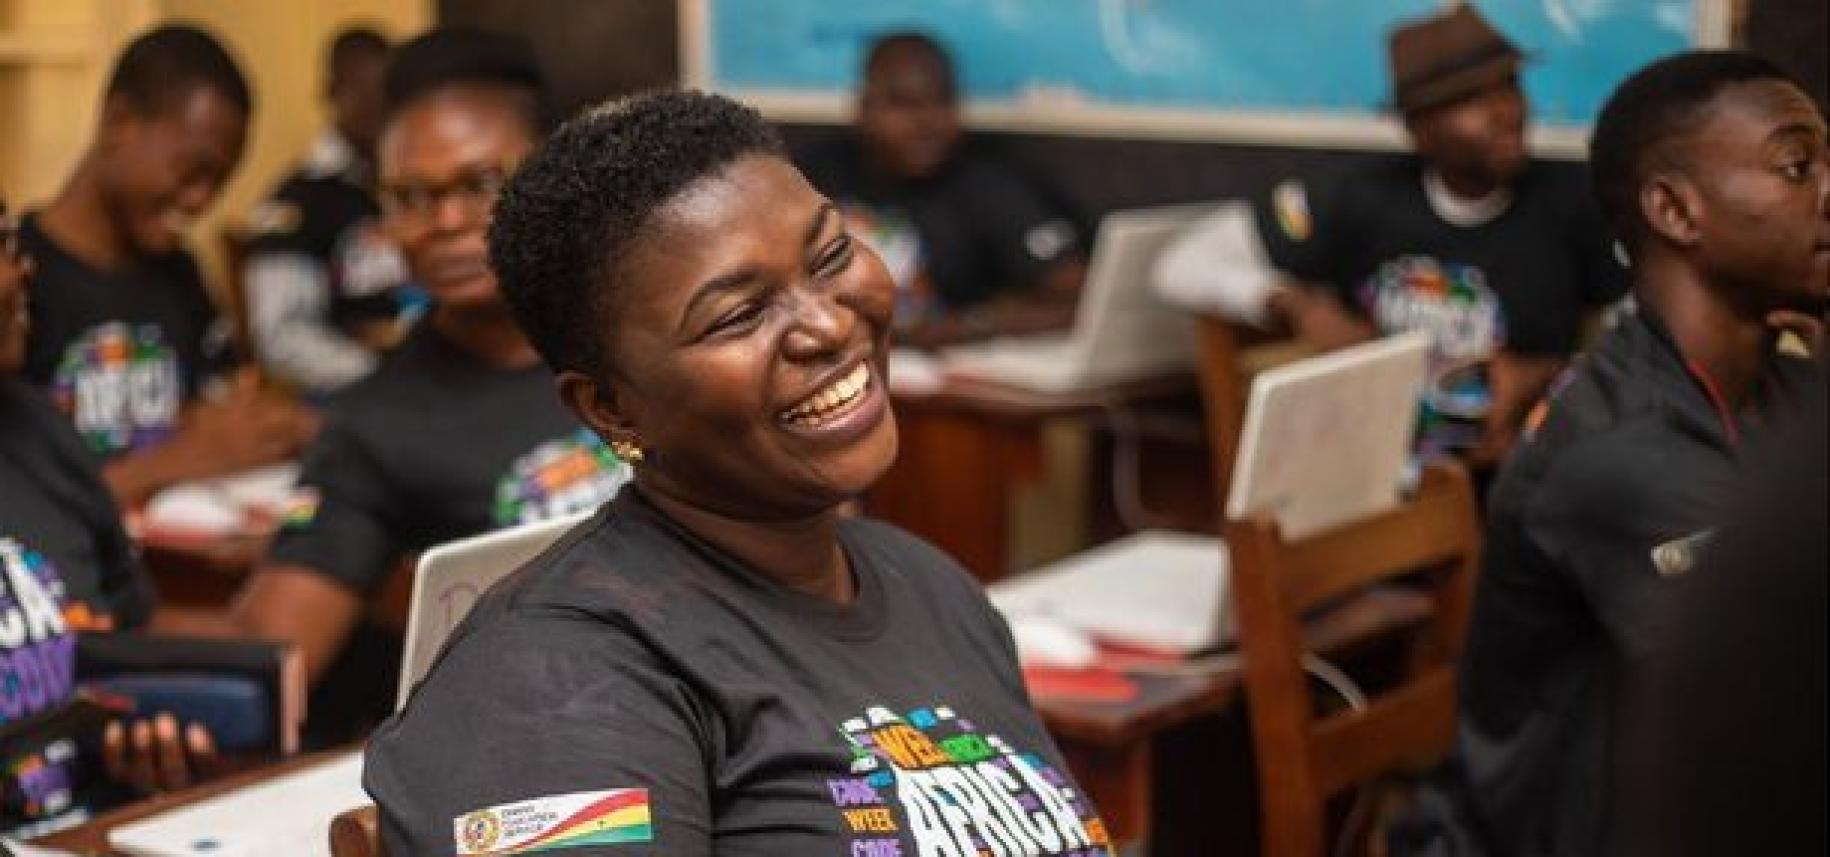 A young woman with very short hair wearing a t-shirt featuring the Africa Code Week logo is photographed in a classroom laughing.